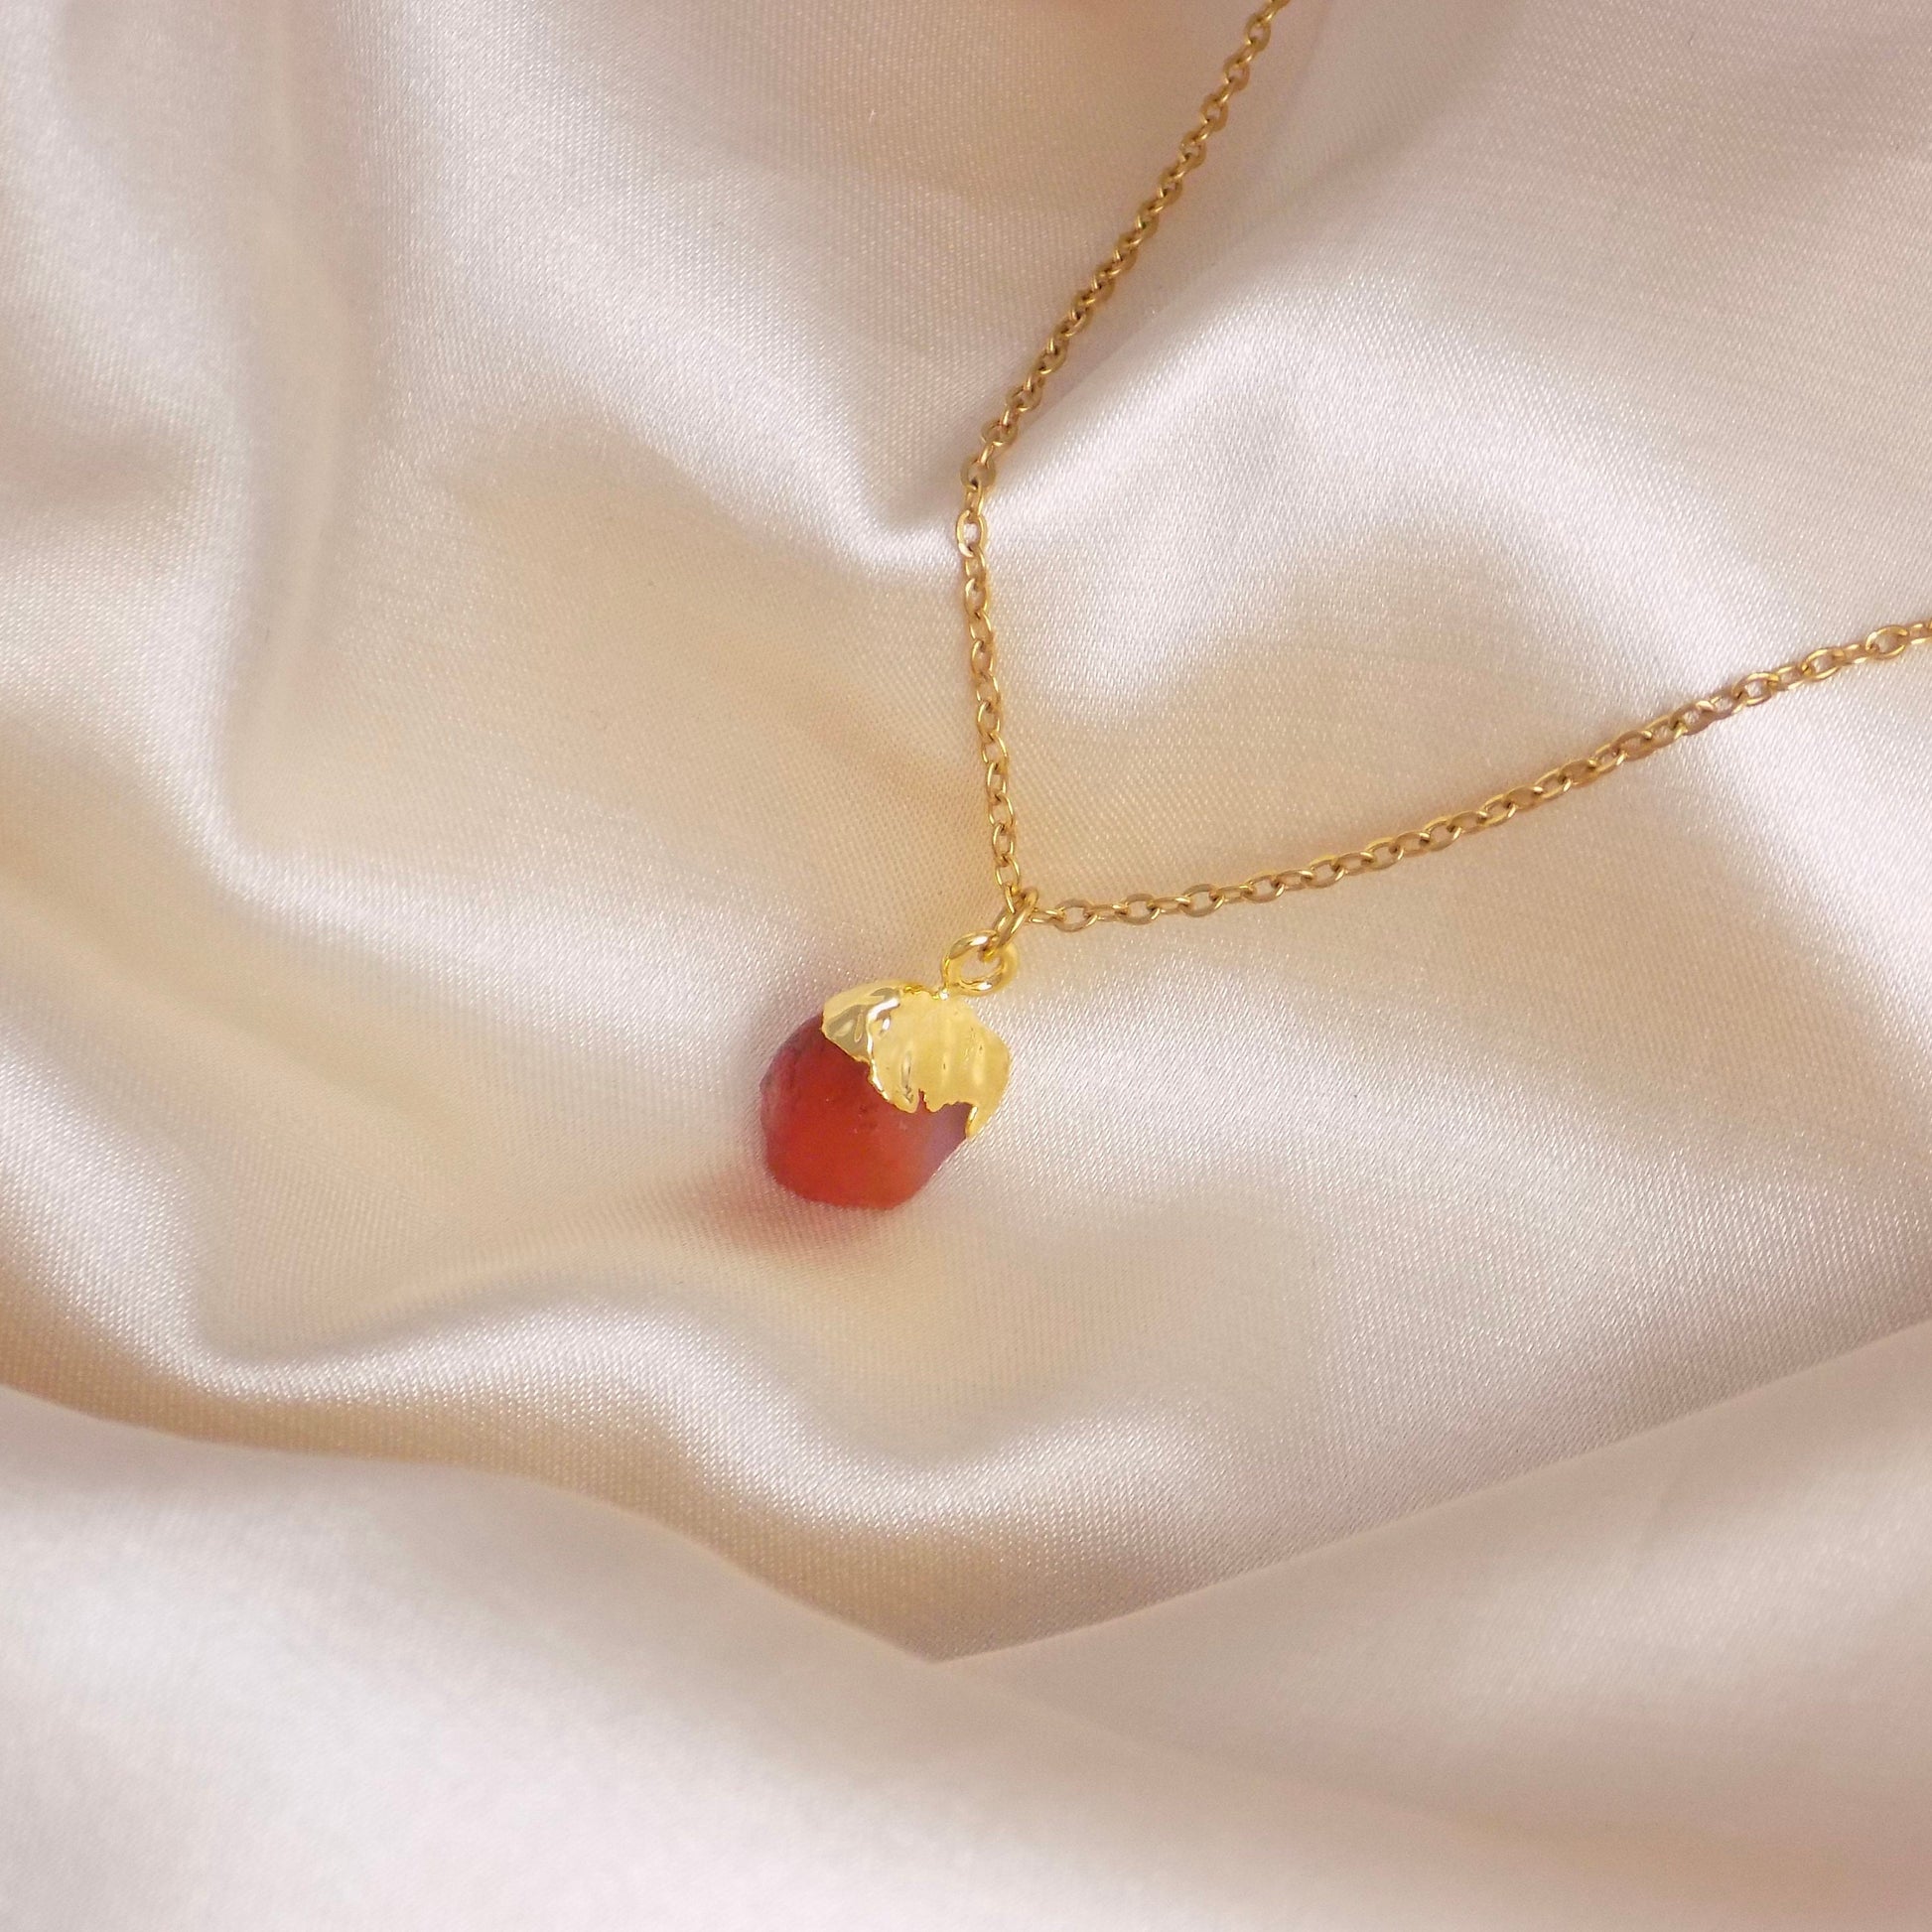 Raw Carnelian Necklace Gold, Orange Crystal Pendant Necklace For Layering, Gift For Mom, M7-16